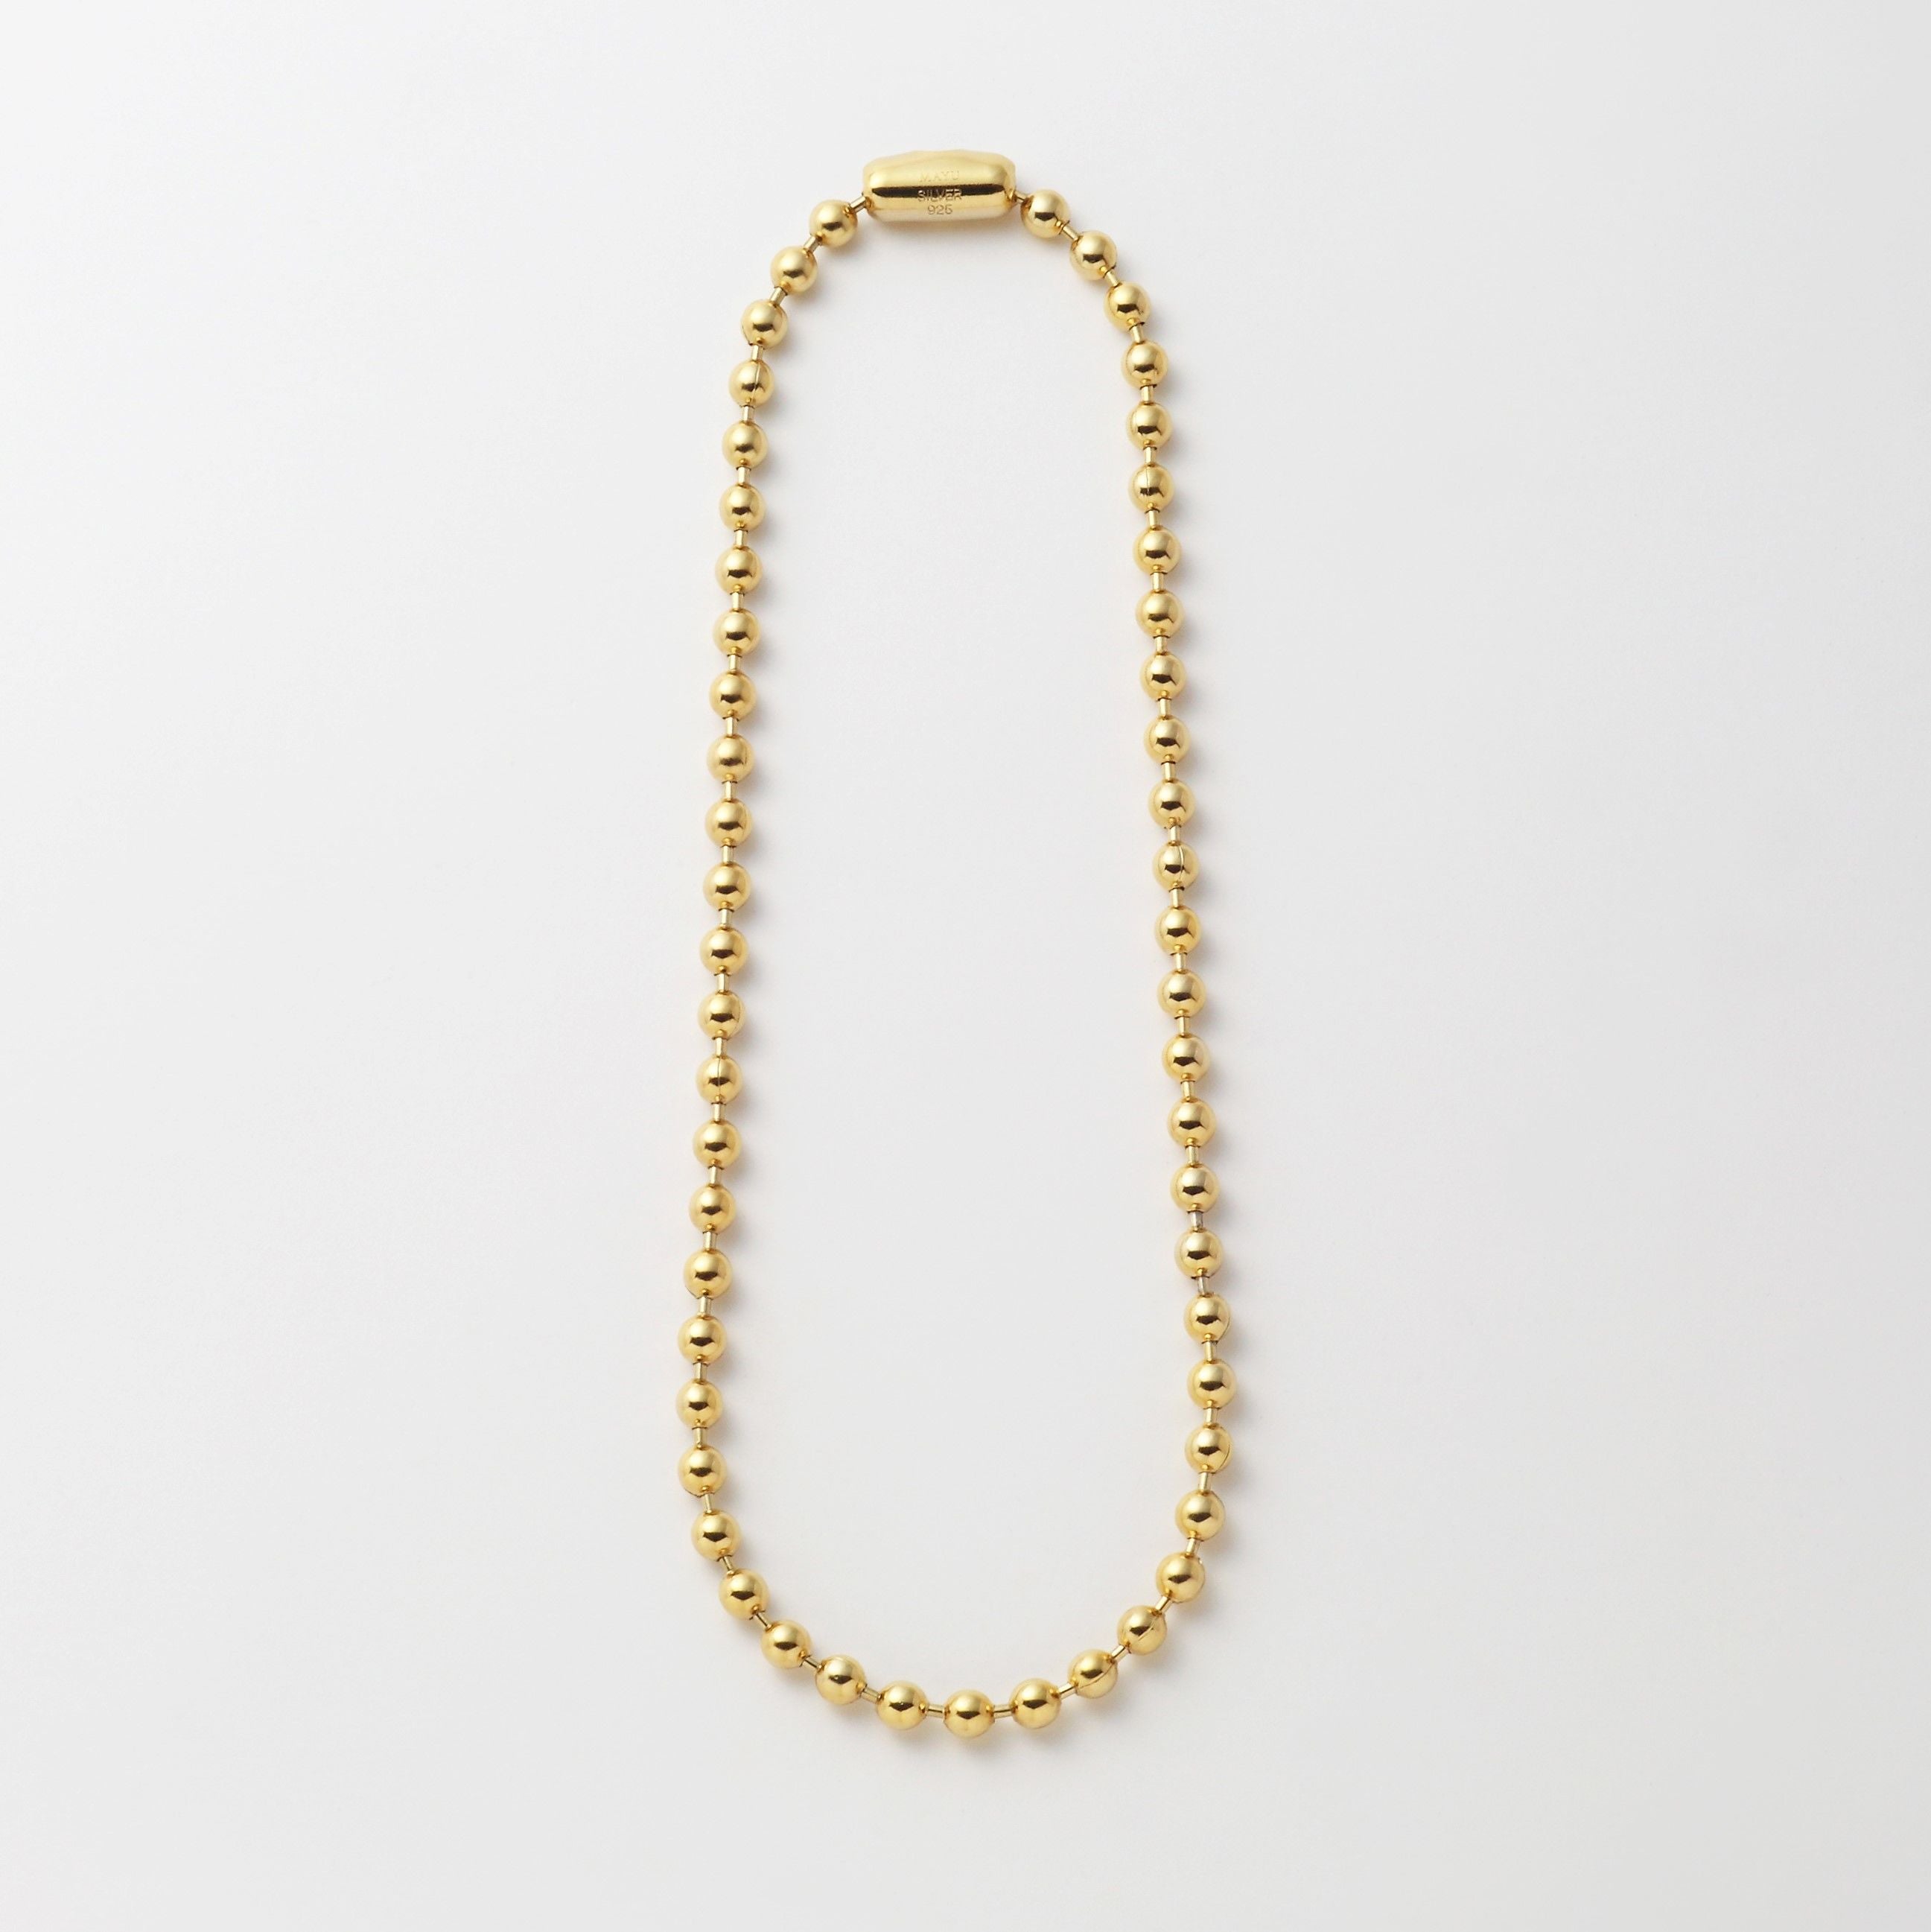 5mm ball chain necklace (gold)